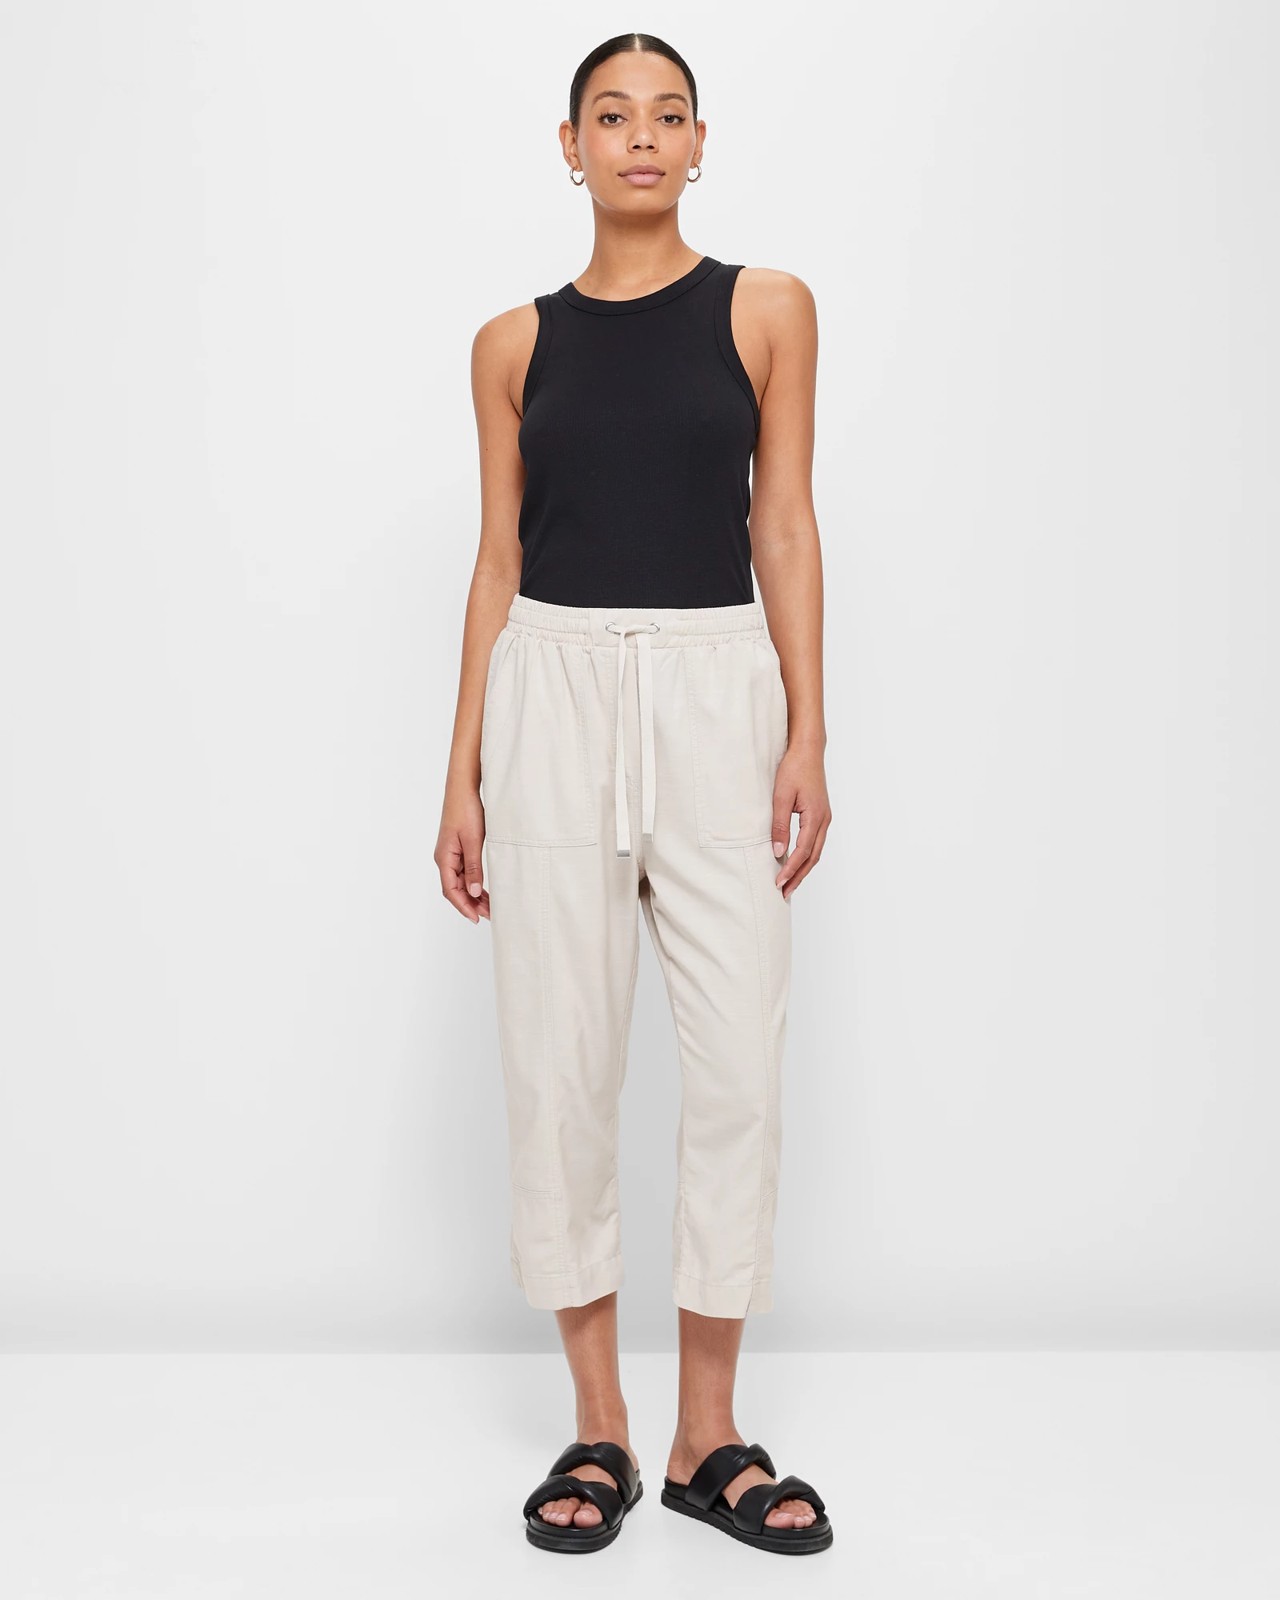 Jogger pants with seam detail - Women